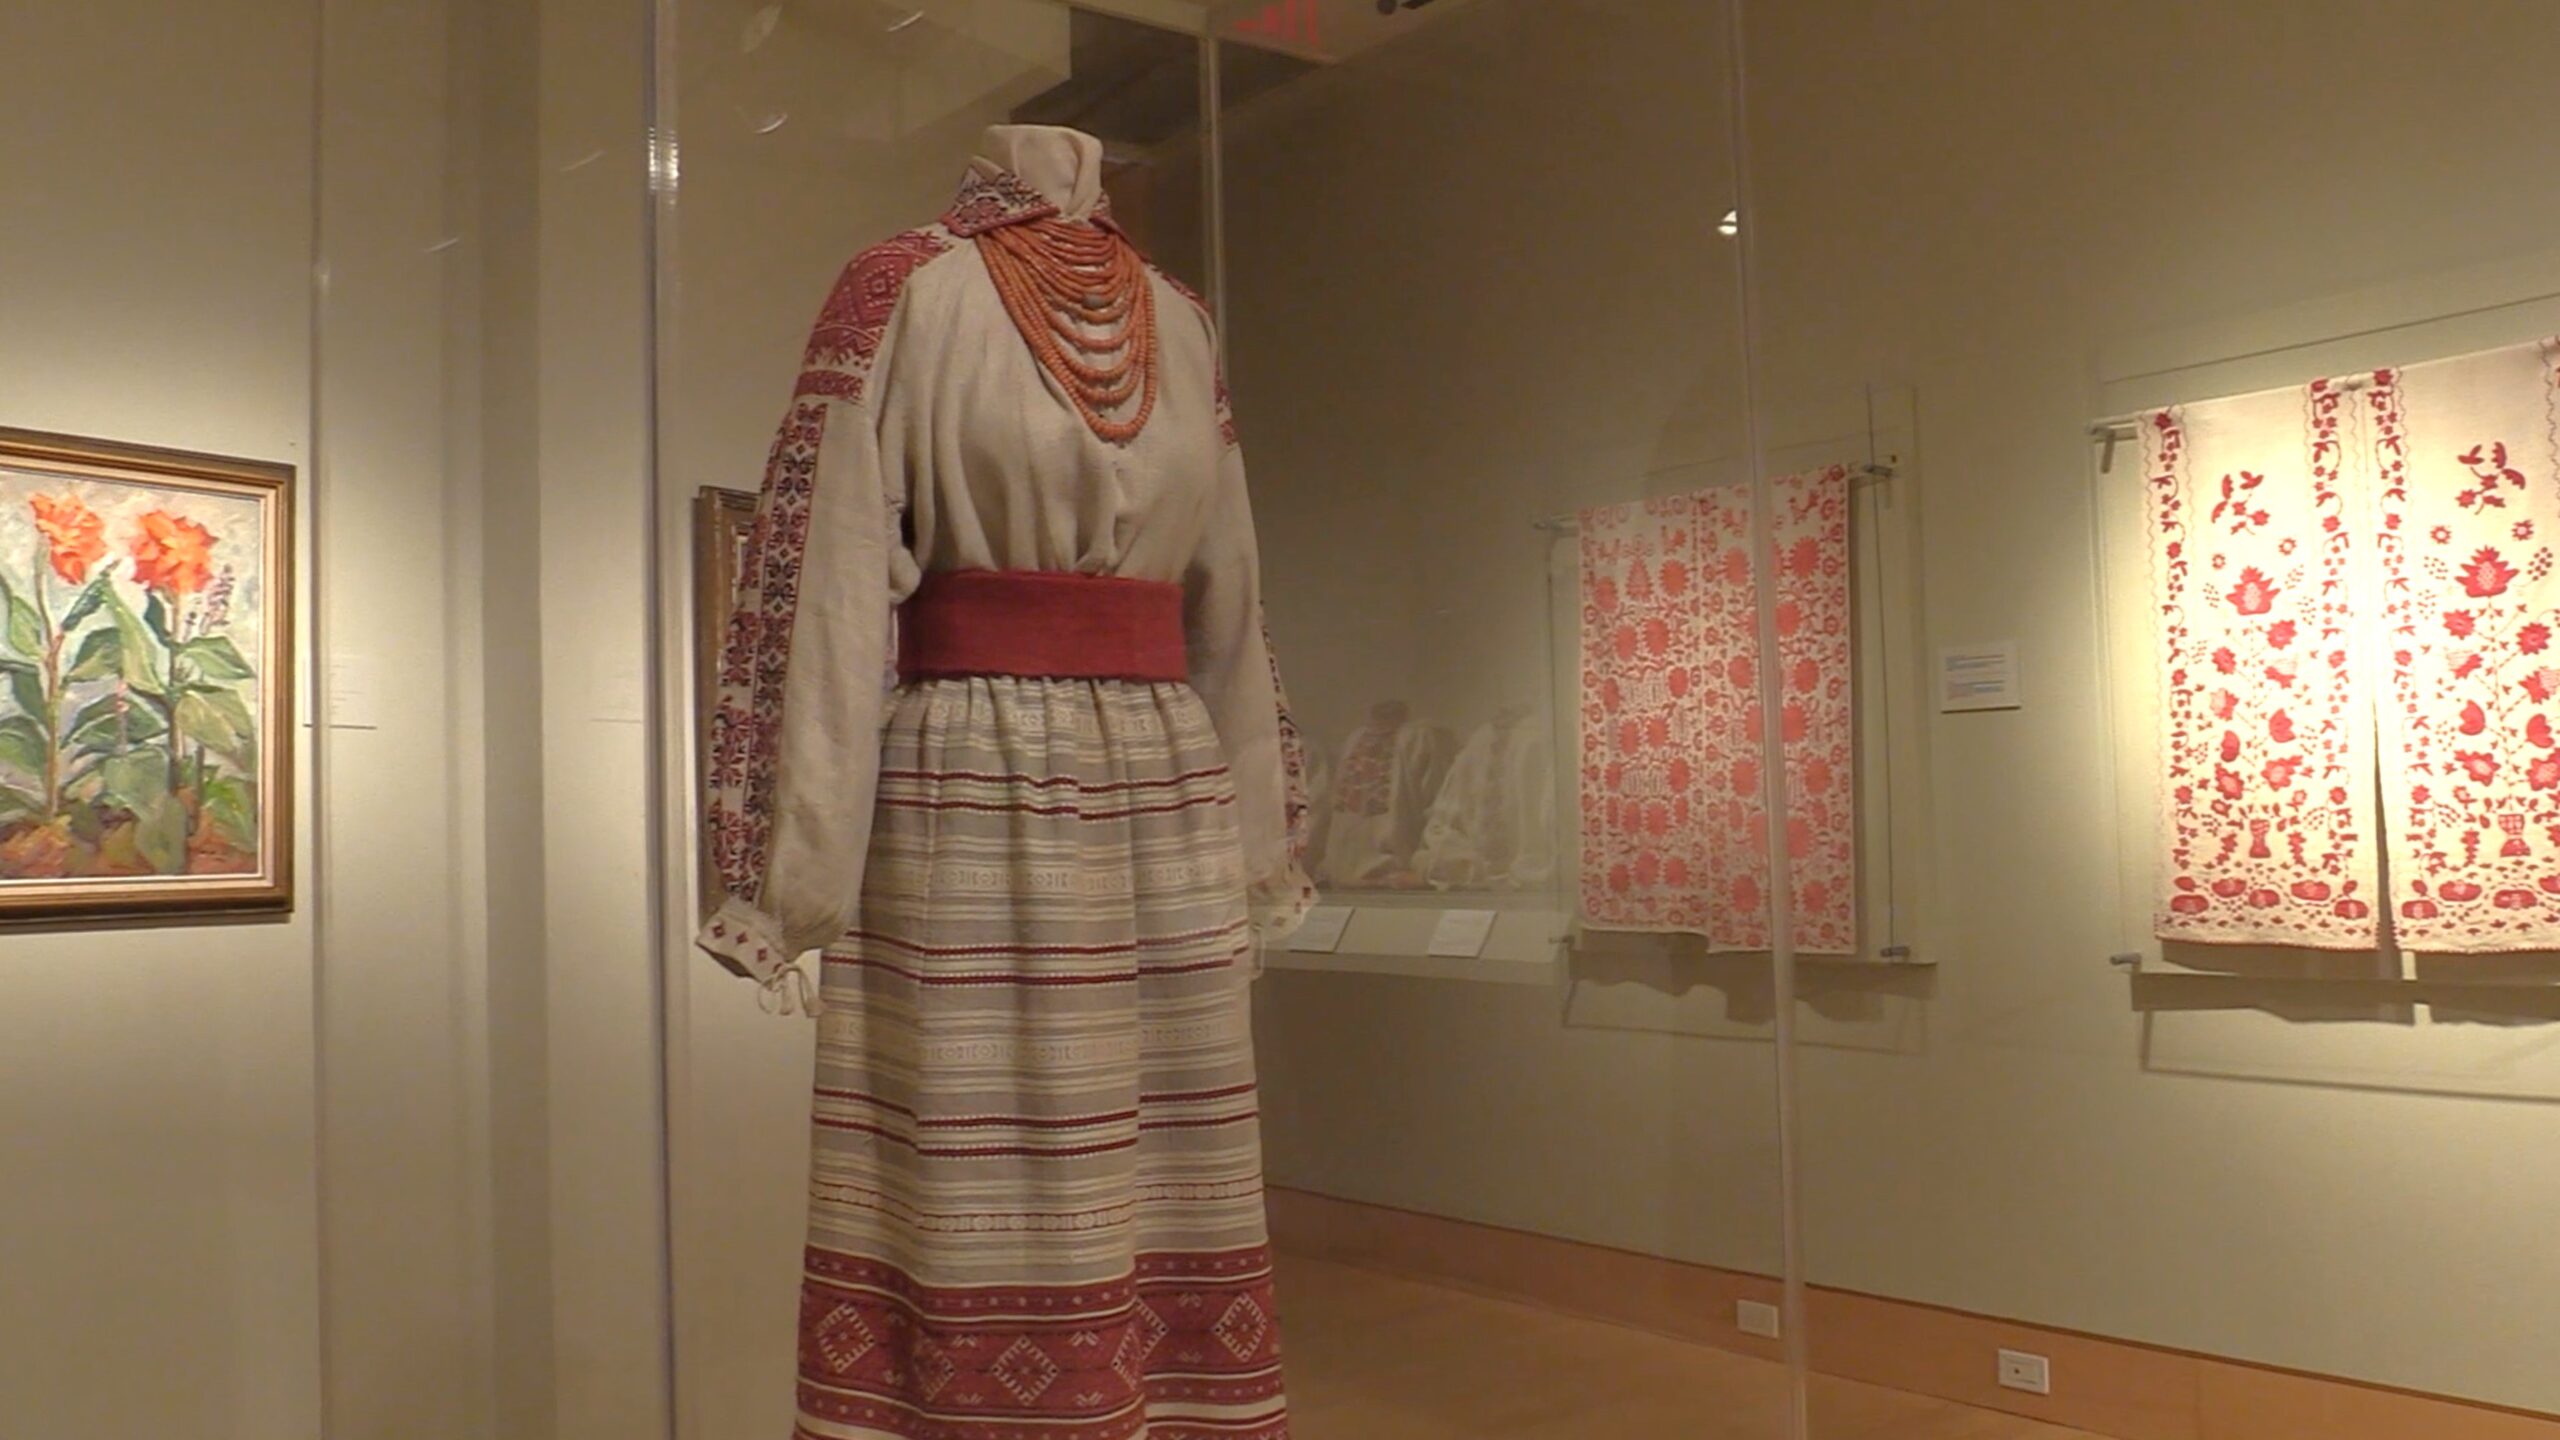 A photograph from inside the Ukrainian Museum; a white-and-red traditional Ukrainian dress stands in the middle, flanked by other Ukrainian artwork hanging on the walls.